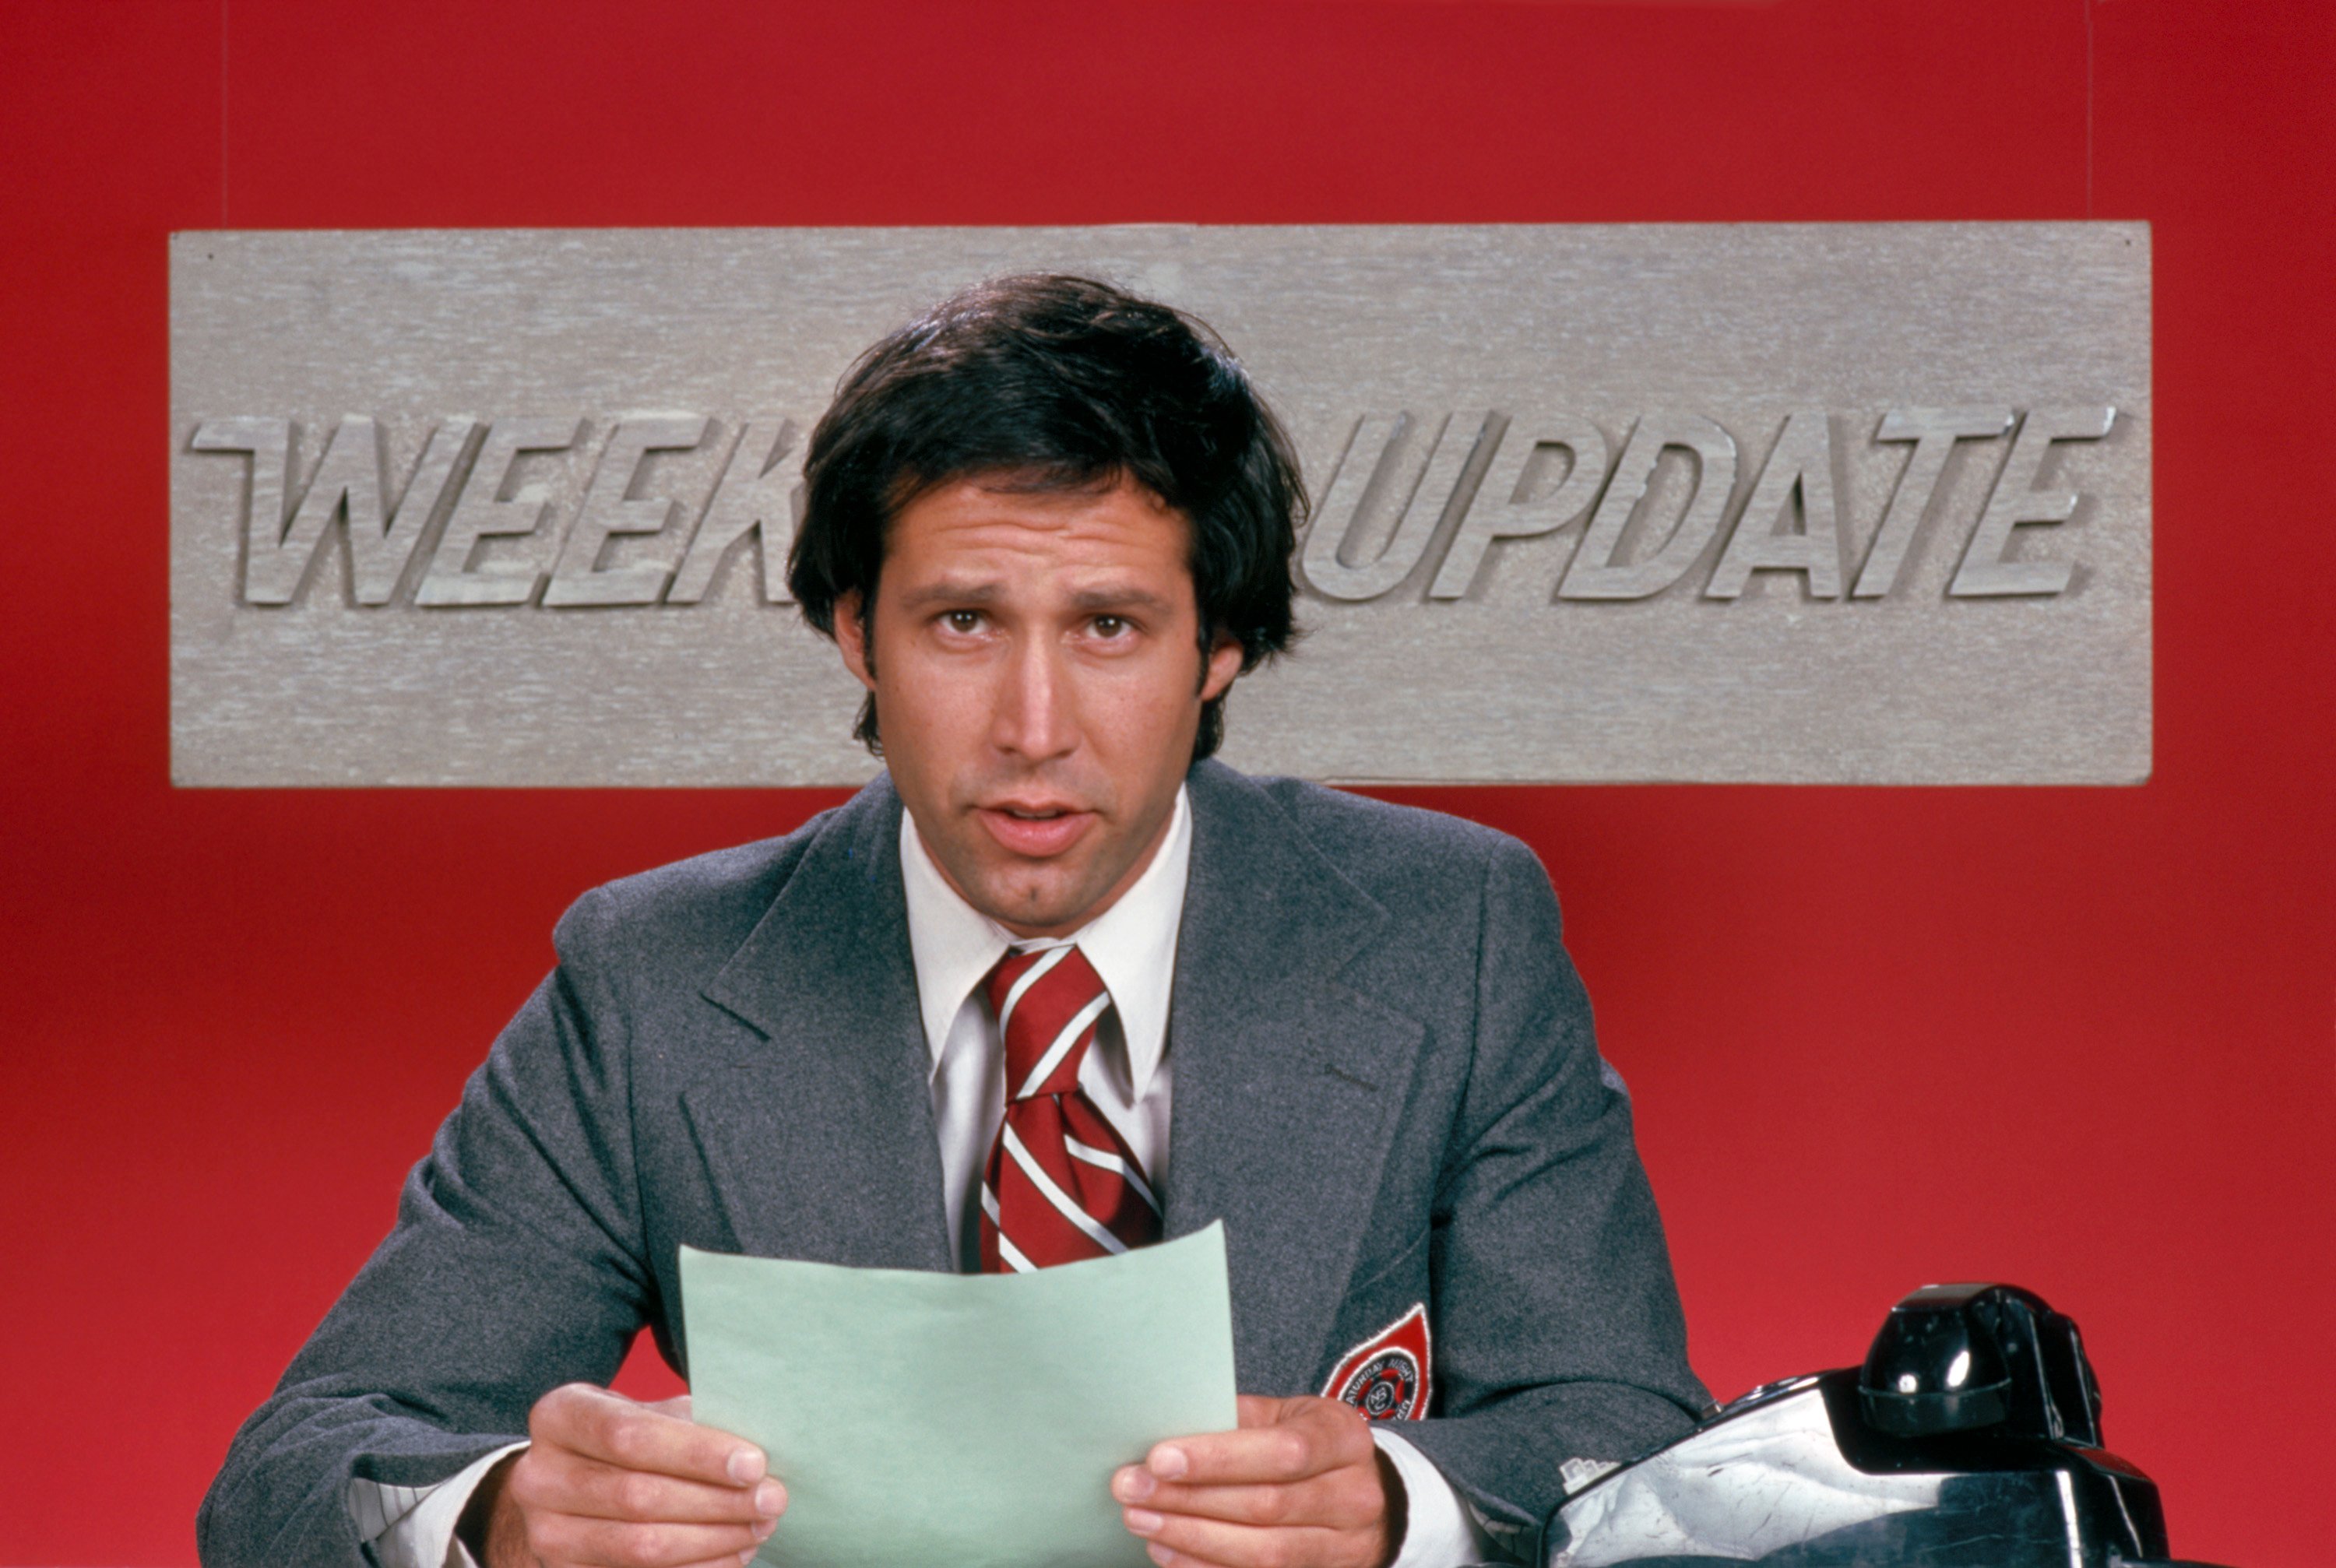 Chevy Chase reads the news on Weekend Update